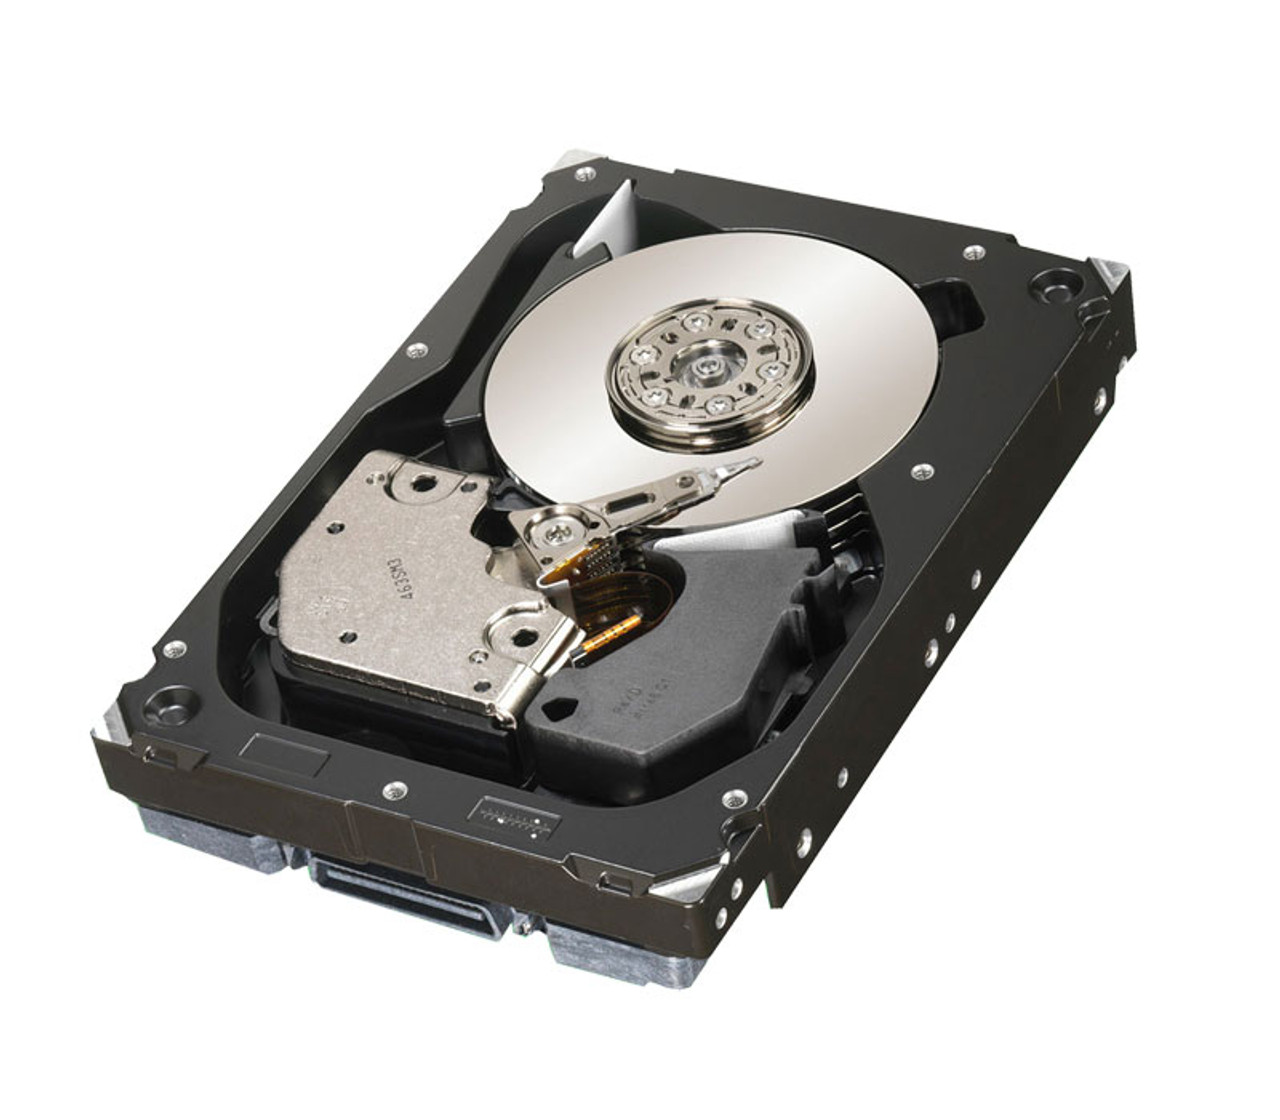 ST336704FCDELL Seagate Cheetah 36LP 36.7GB 10000RPM Fibre Channel 2Gbps 4MB Cache 3.5-inch Internal Hard Drive